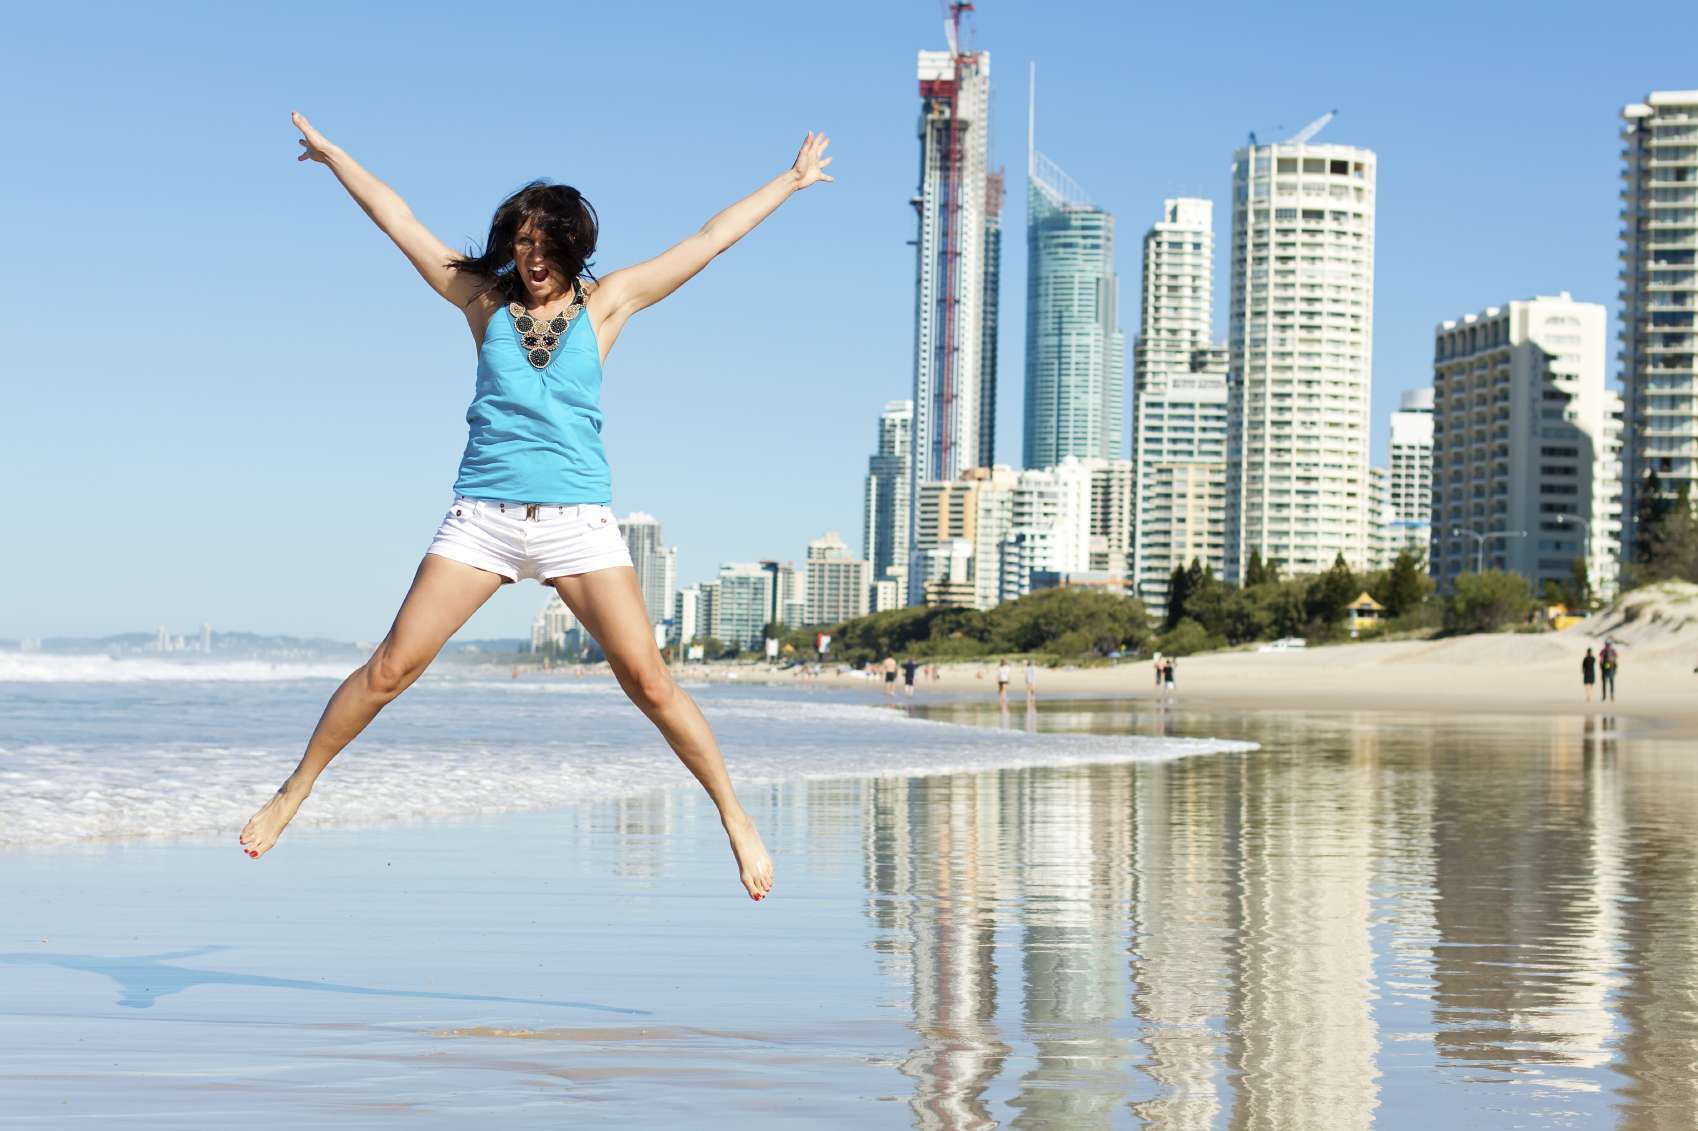 Schoolies 2014 is coming – plan early so your children enjoy it in safety